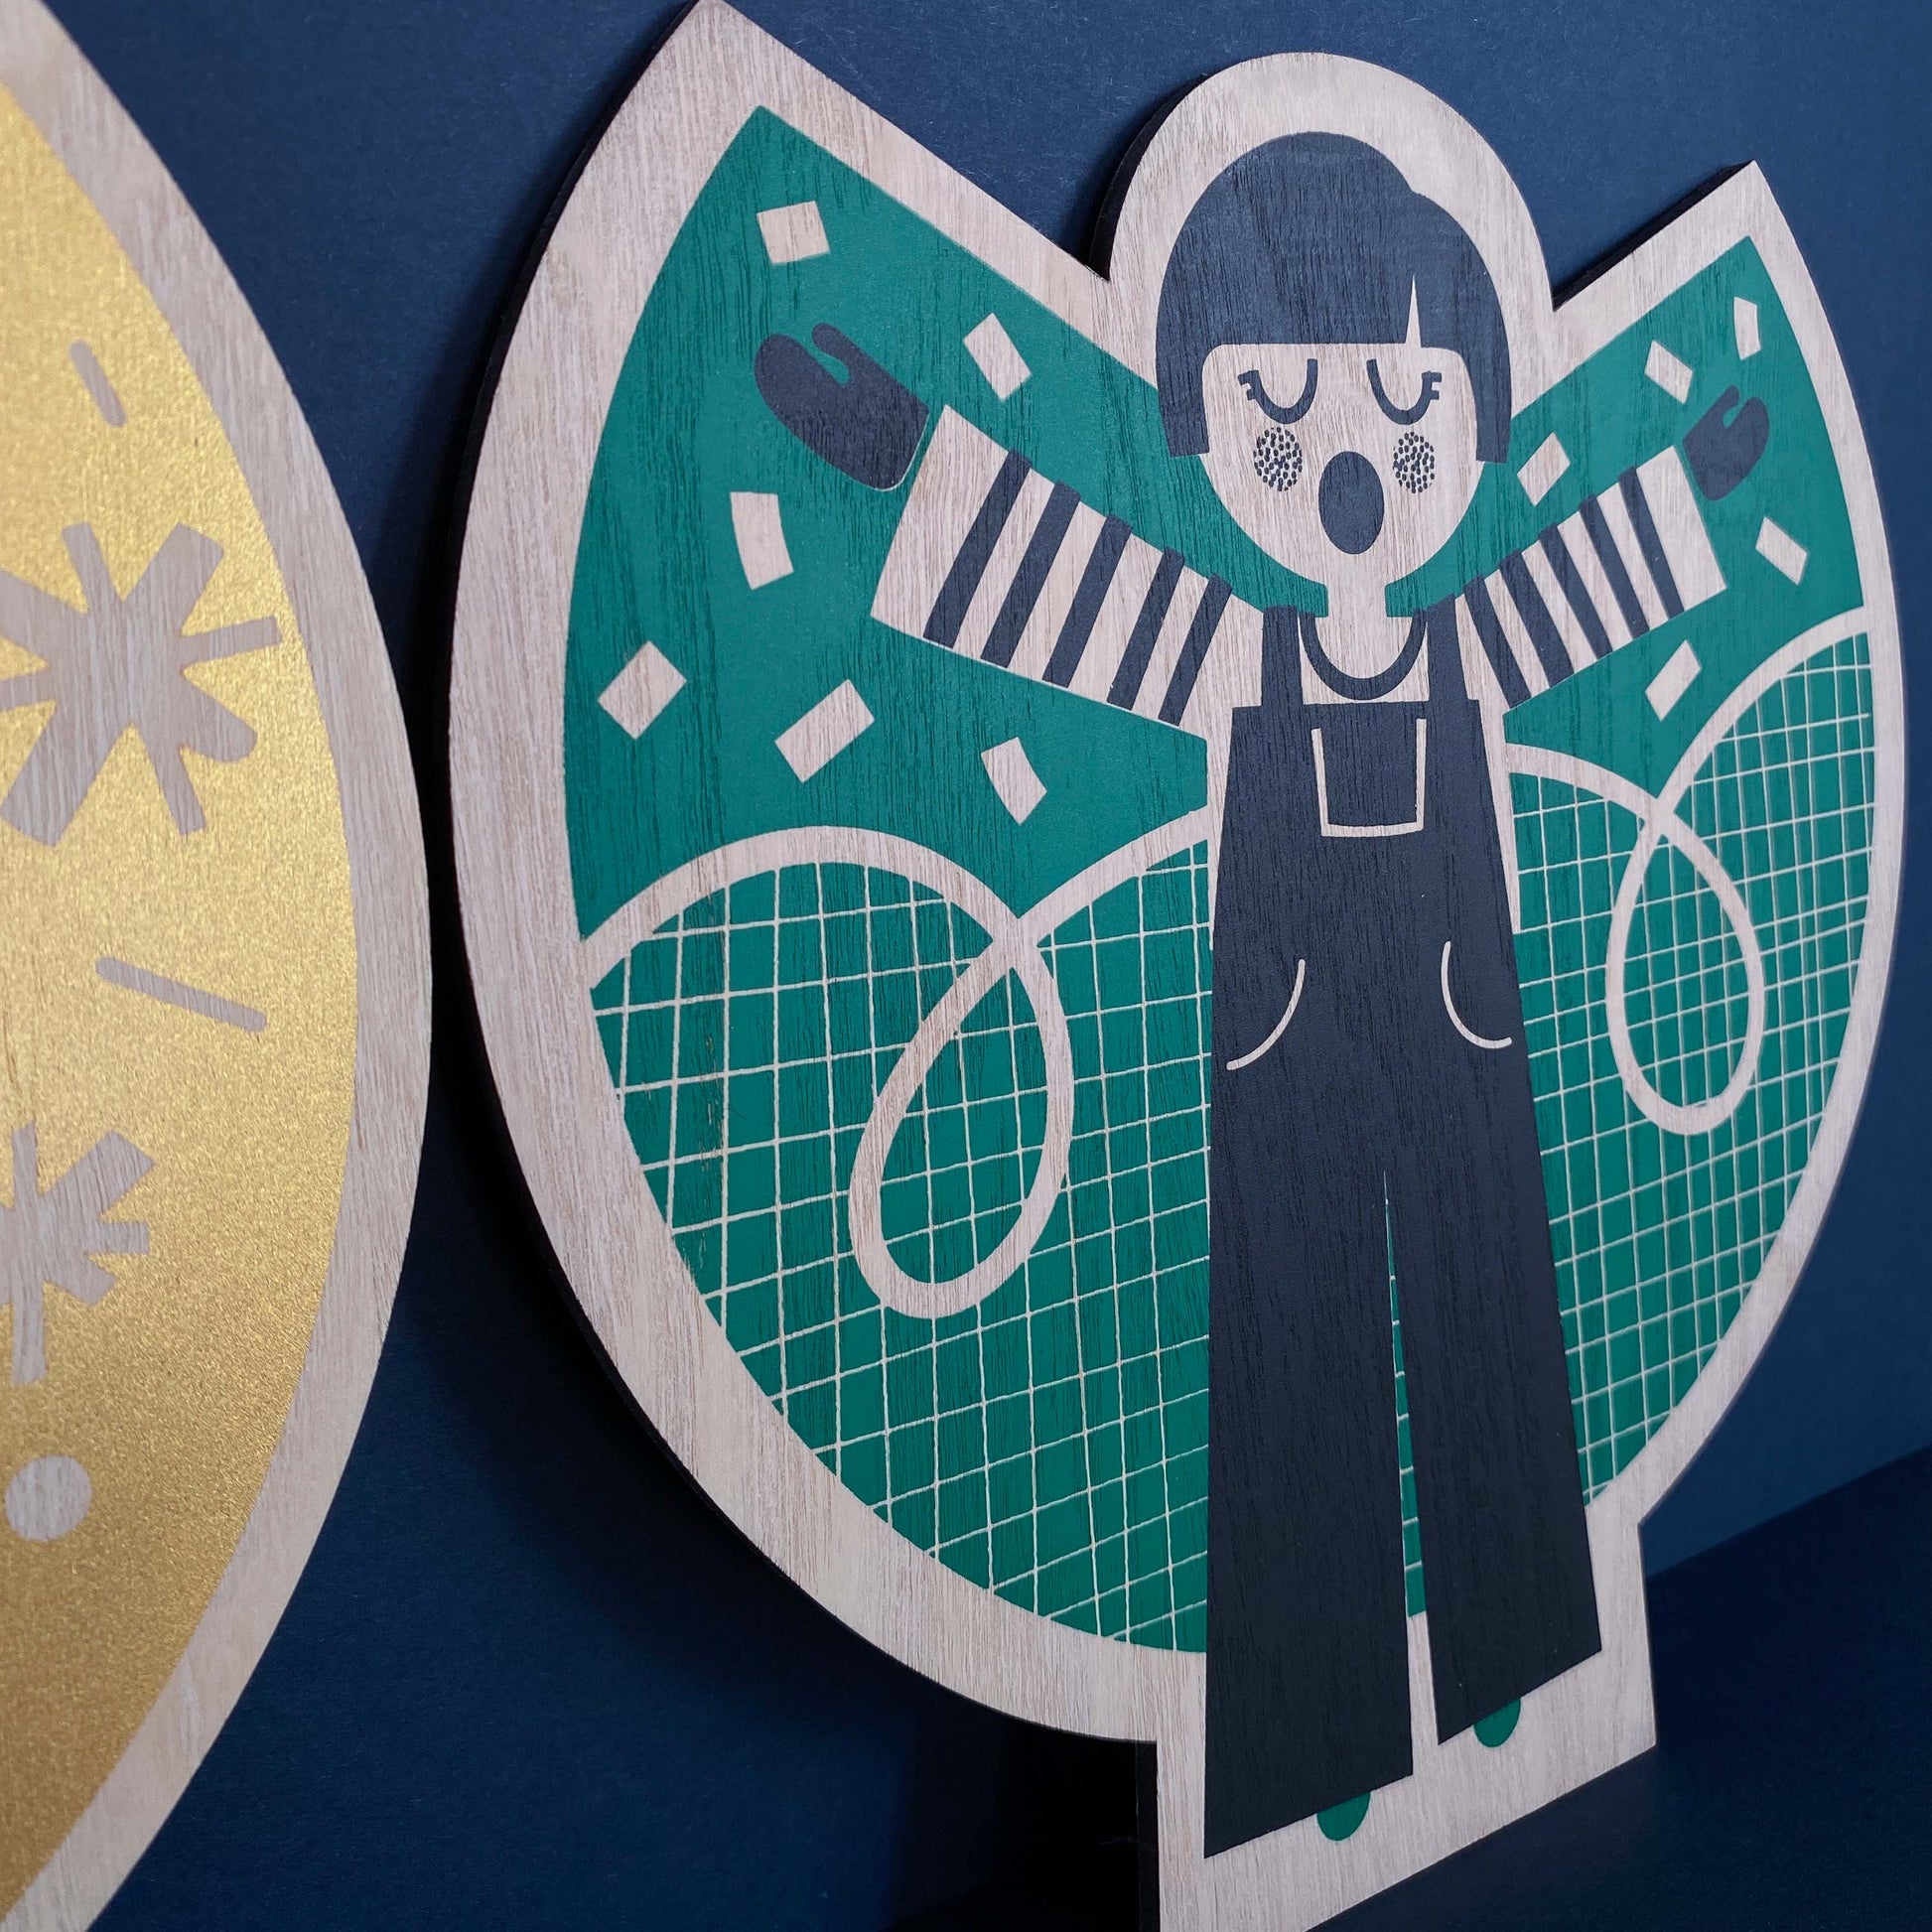 Wooden Screen Printed Angel by The Print Lass - green wooden angel shown on navy background